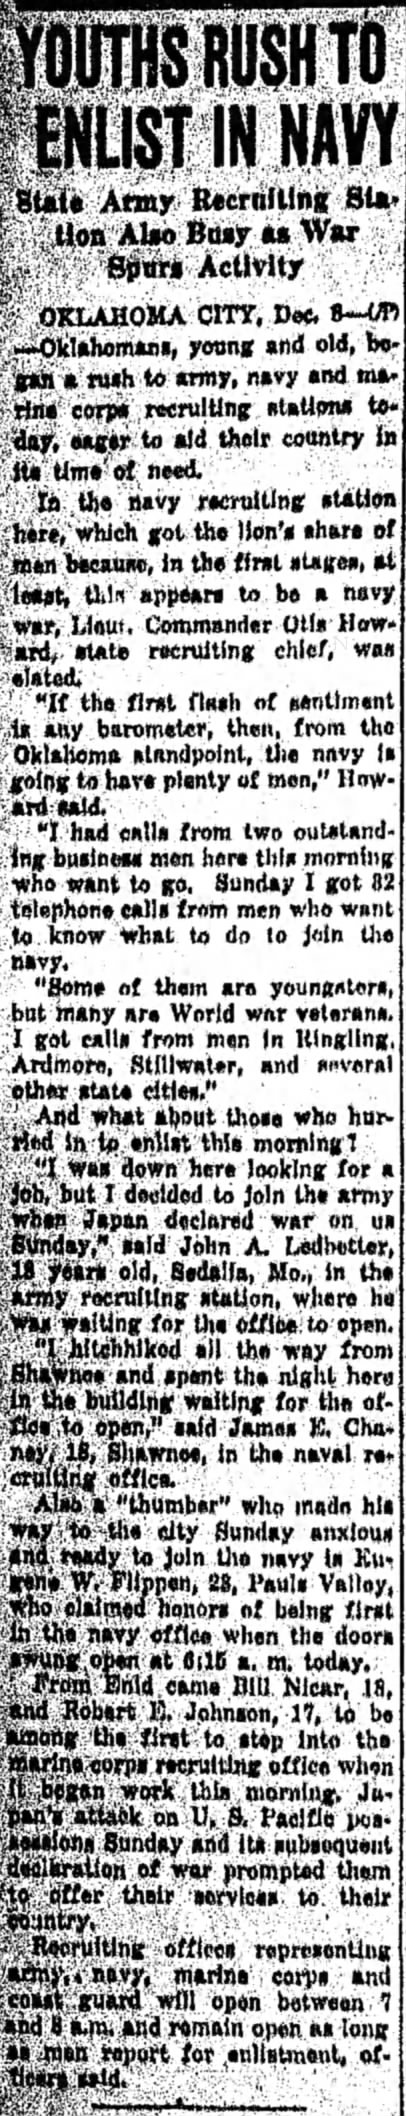 "Youths rush to enlist in Navy" following attack on Pearl Harbor